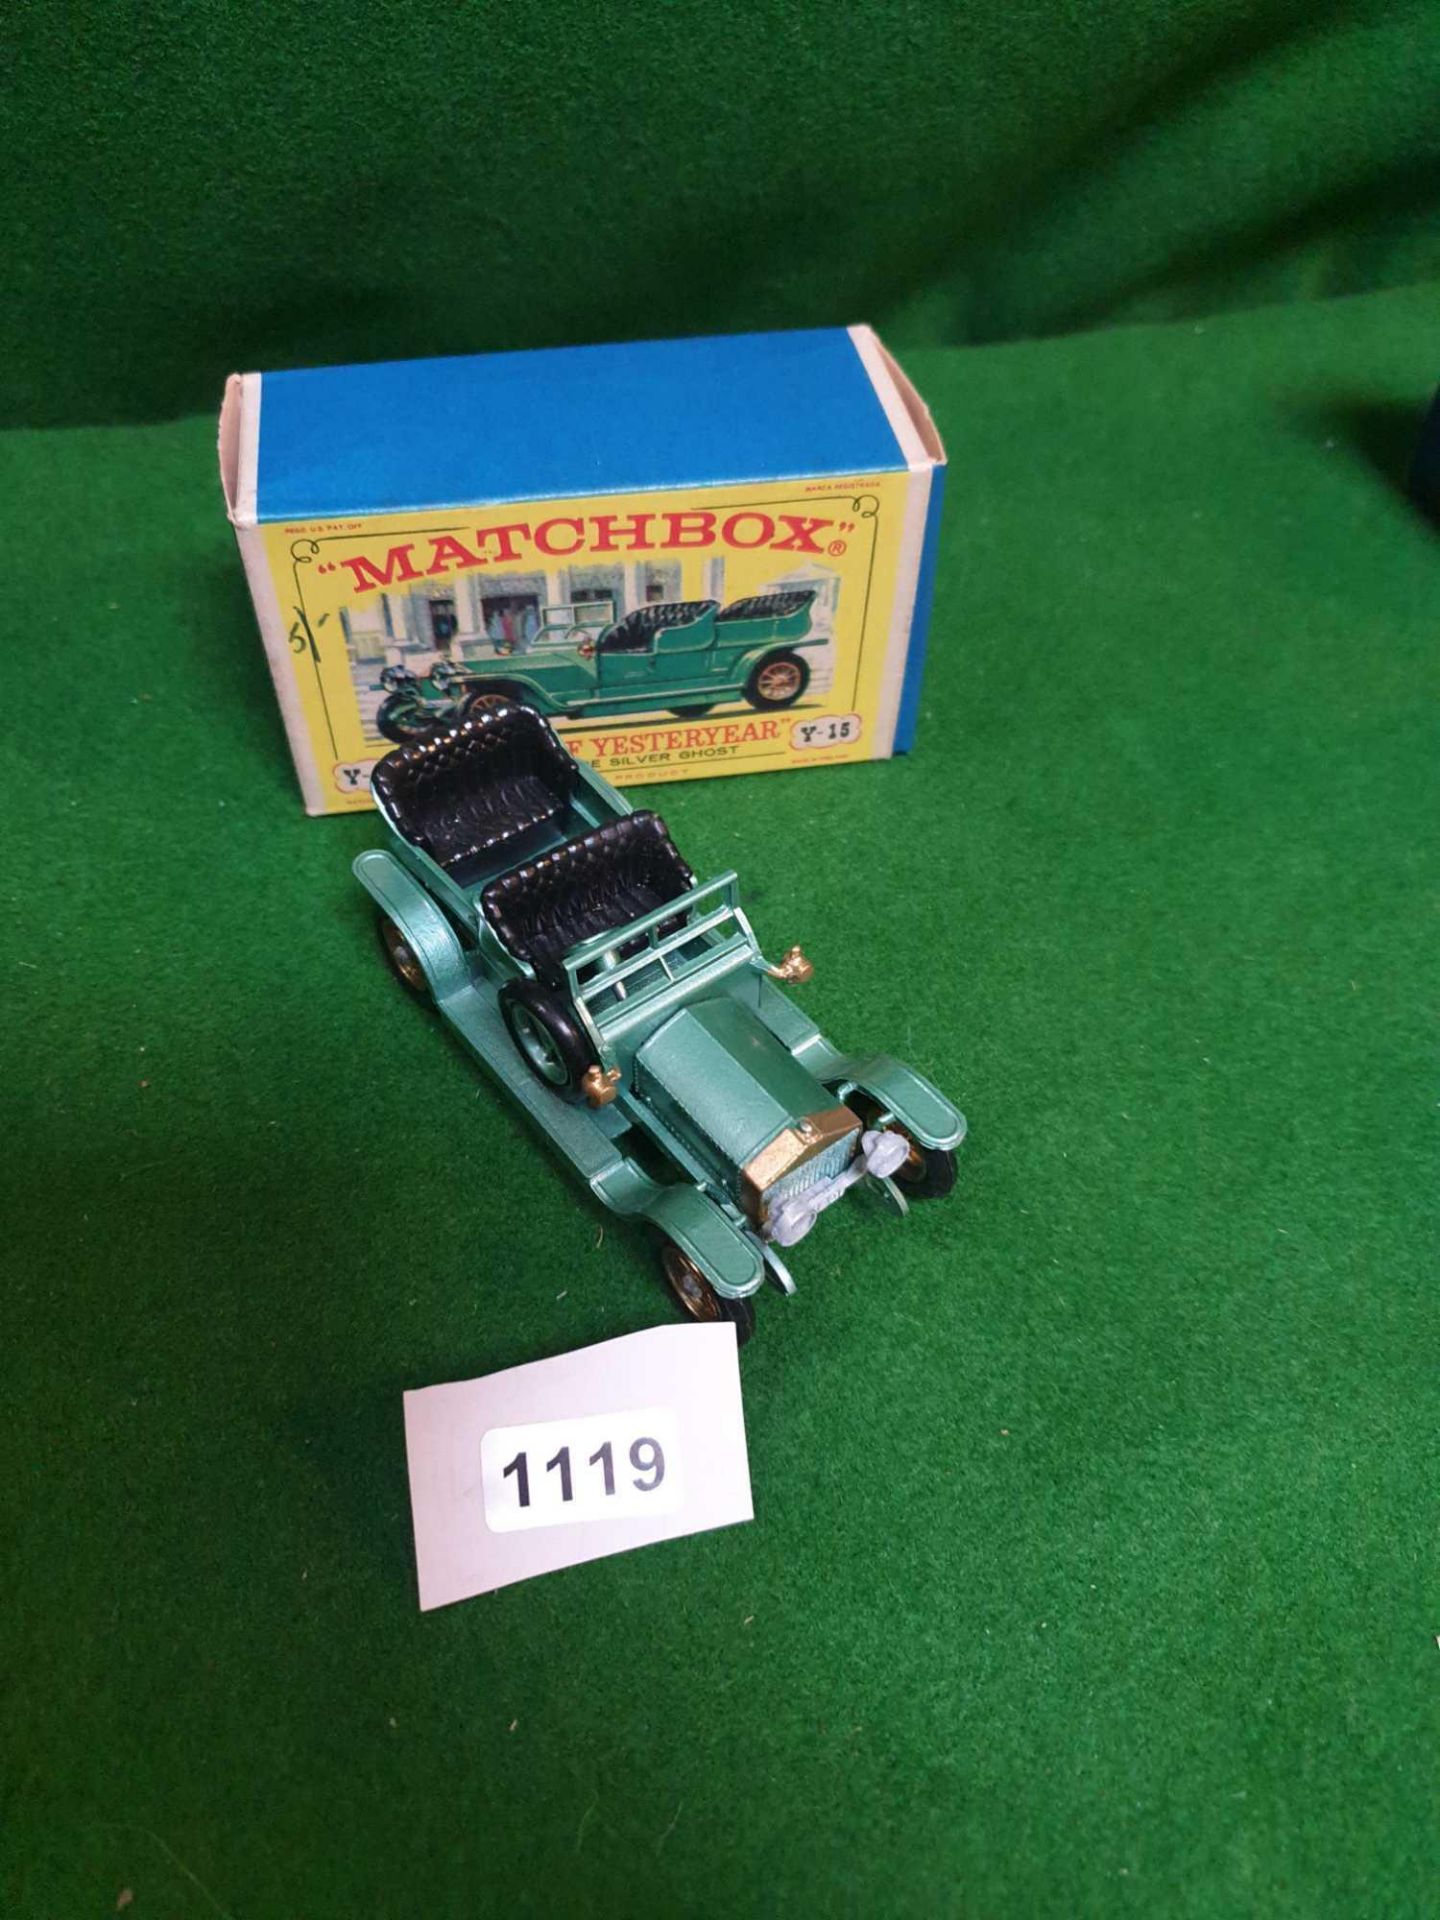 Matchbox Models Of Yesteryear #Y15 Rolls Royce Silver Ghost With Black Wheels In Crisp Box - Image 2 of 2